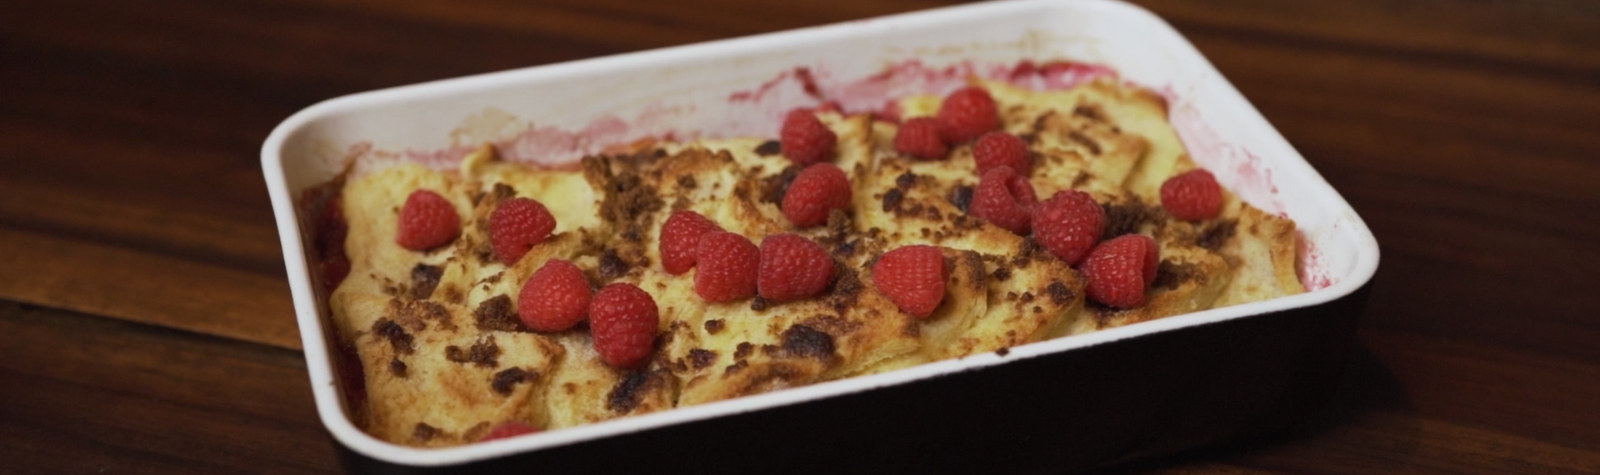 Rhubarb Bread and Butter Pudding Recipe